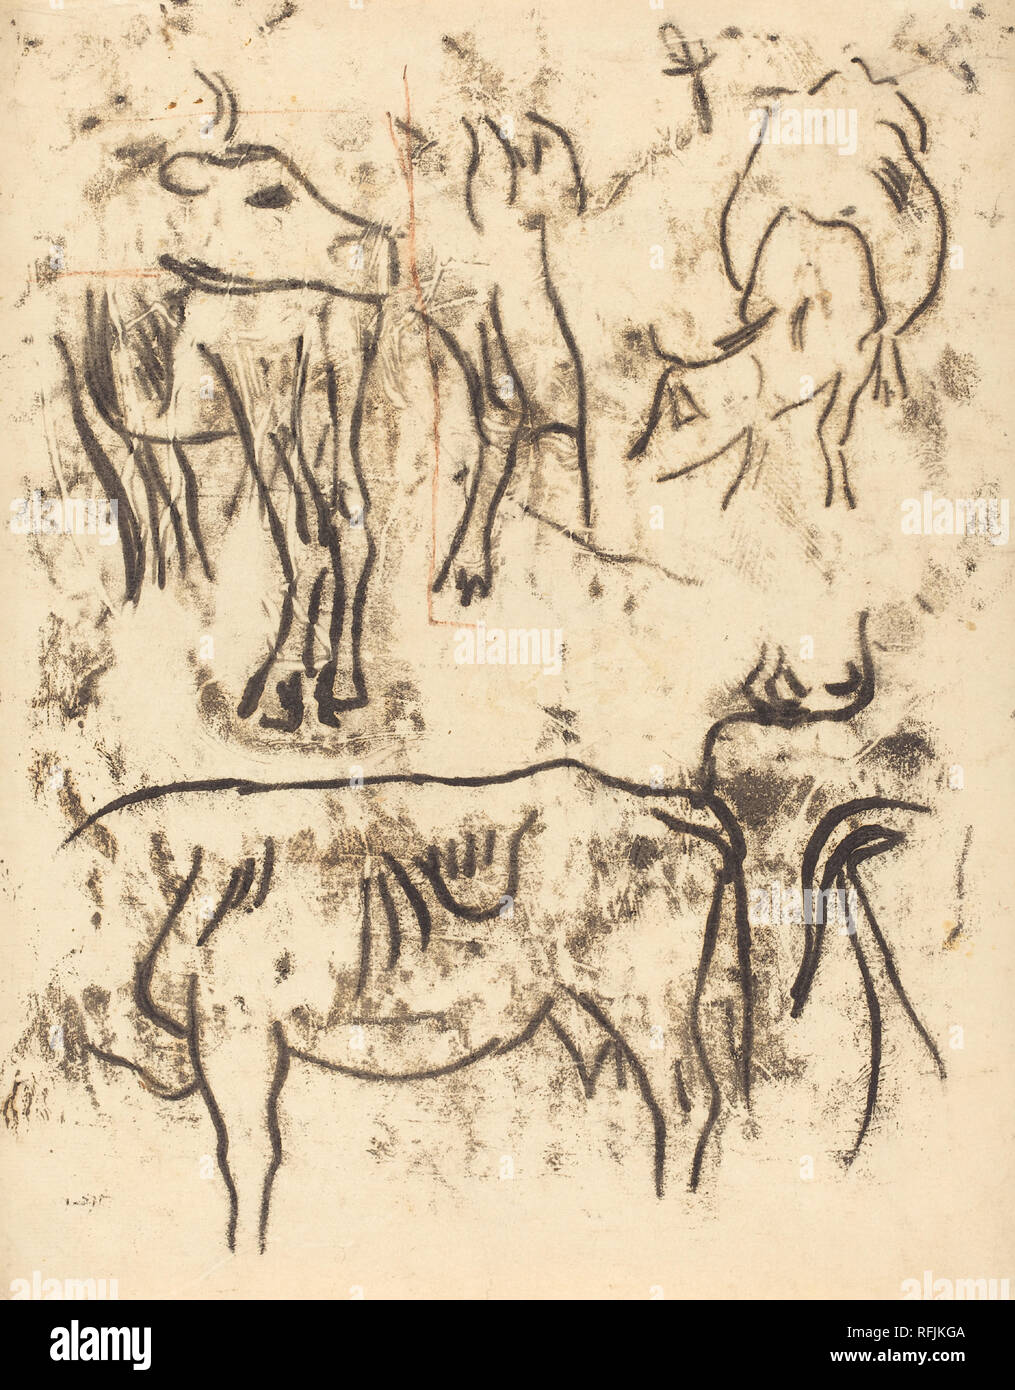 Animal Studies. Dated: 1901/1902. Medium: traced monotype in black and red on thin wove paper laid down on wove paper. Museum: National Gallery of Art, Washington DC. Author: PAUL GAUGUIN. Stock Photo